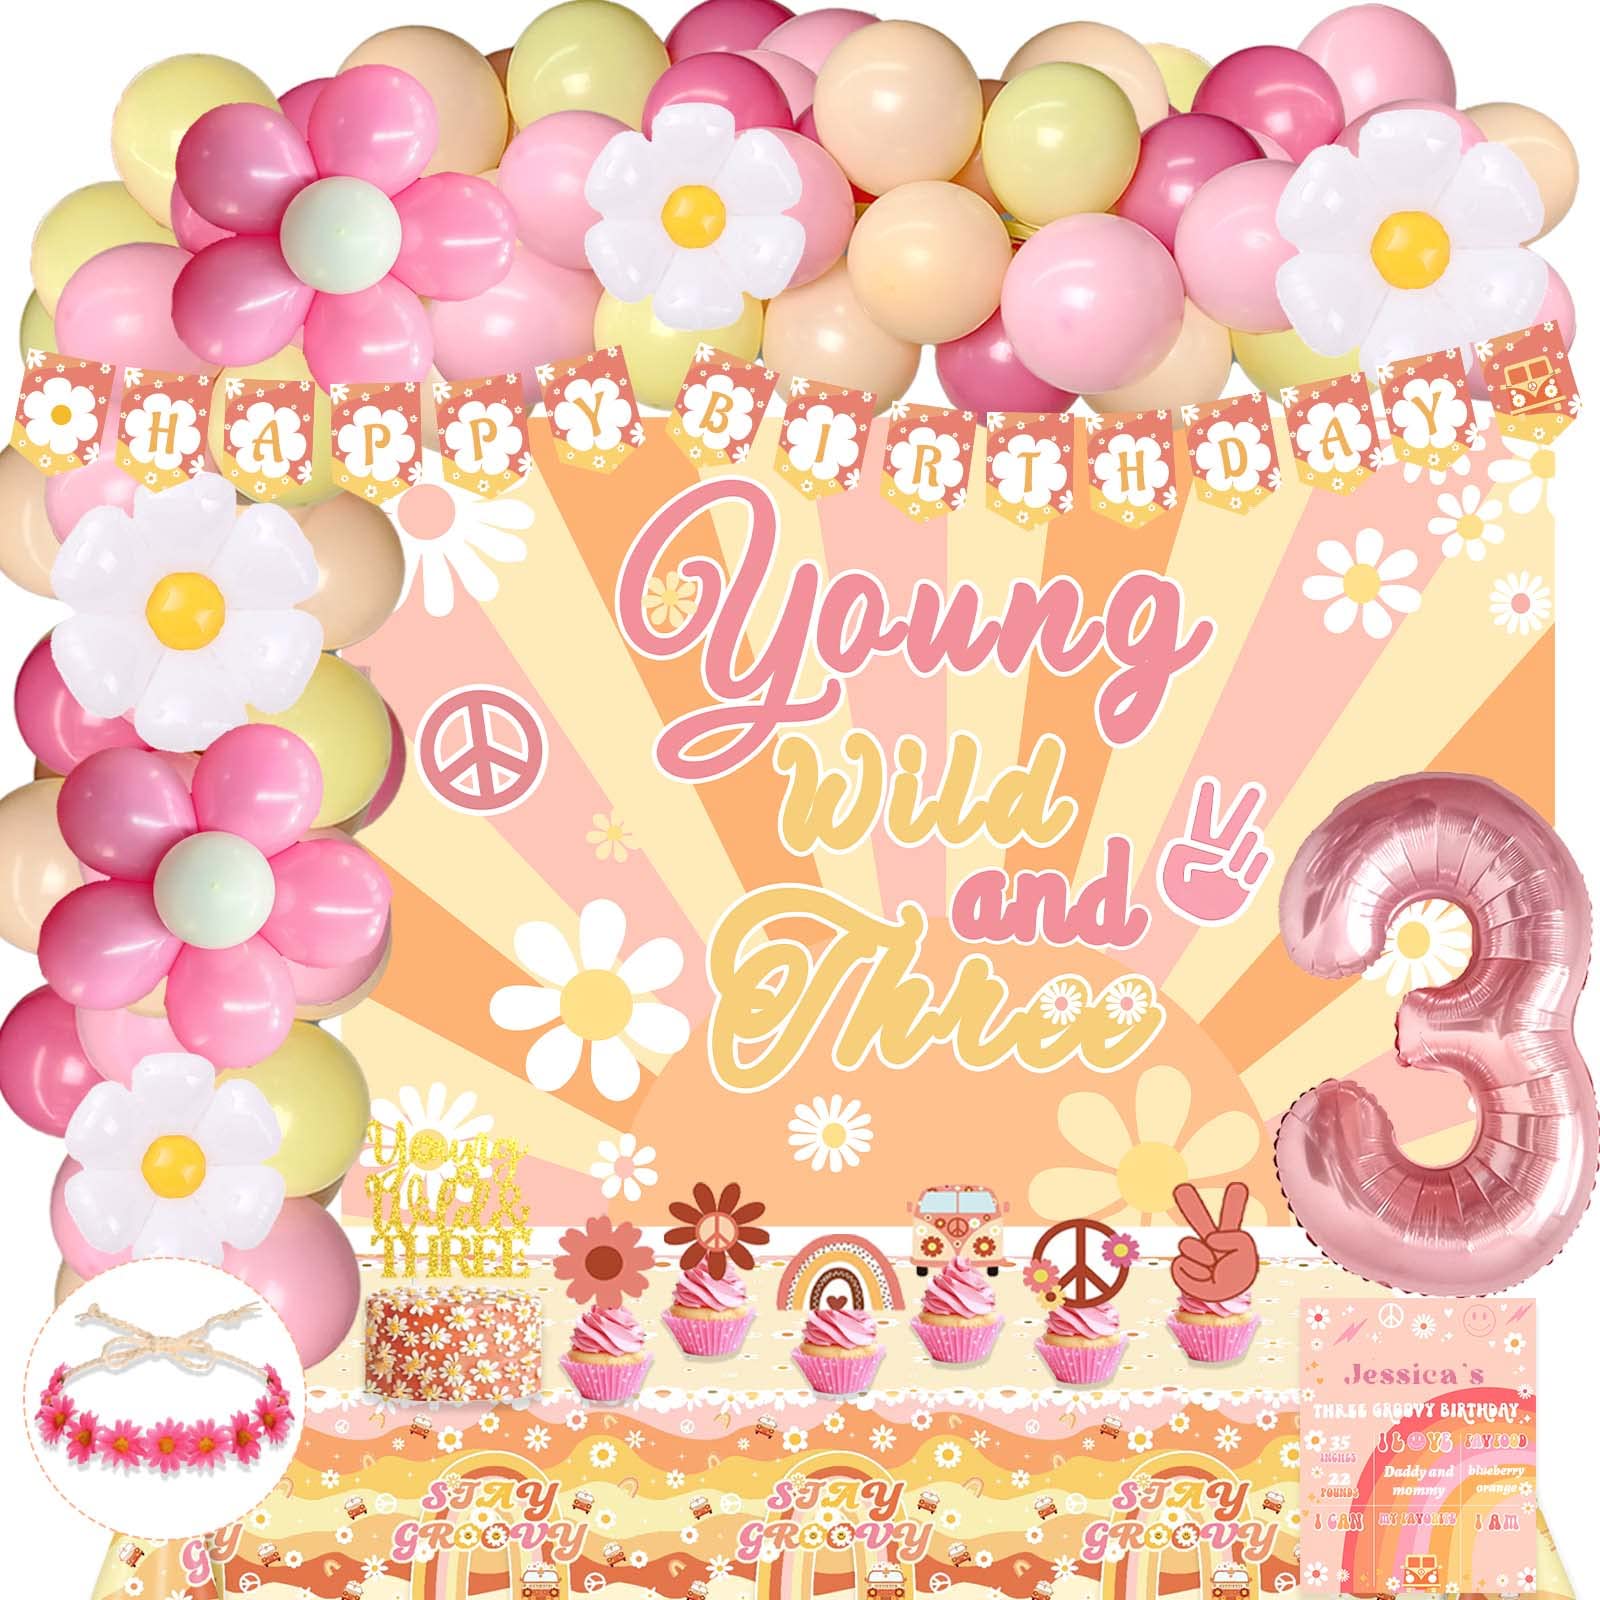 122 PCs Young Wild and Three Decorations Girl, Fiesec Groovy Boho Daisy Hippie 3rd Birthday Party Decorations Backdrop Balloon Garland Banner Tablecloth Cake Cupcake Topper Headband Poster Retro Pink